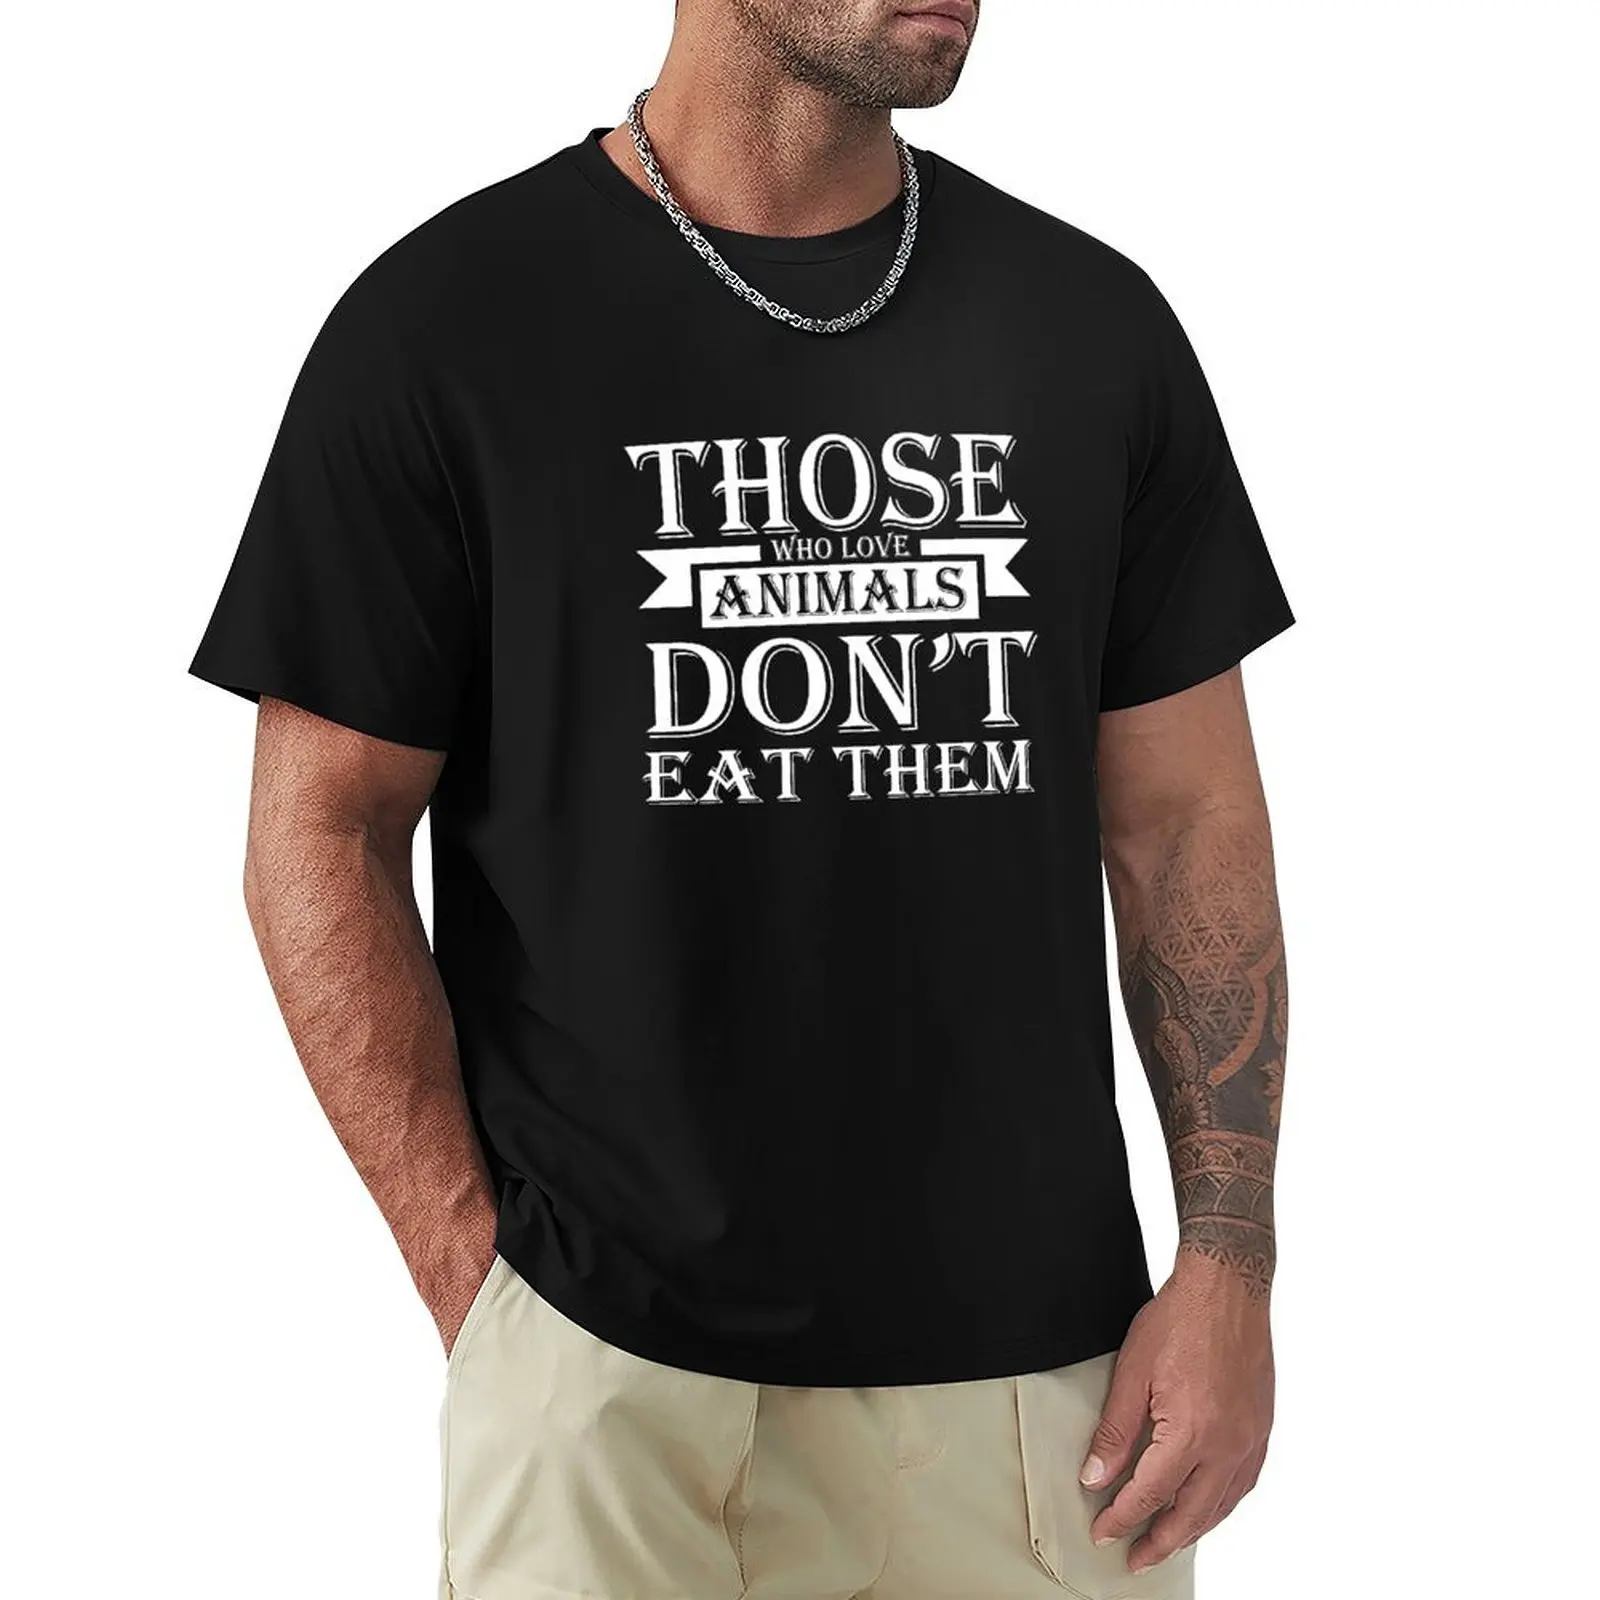 

Those Who love animals Don't Eat Them T-shirt hippie clothes plus sizes blacks Aesthetic clothing t shirts for men pack